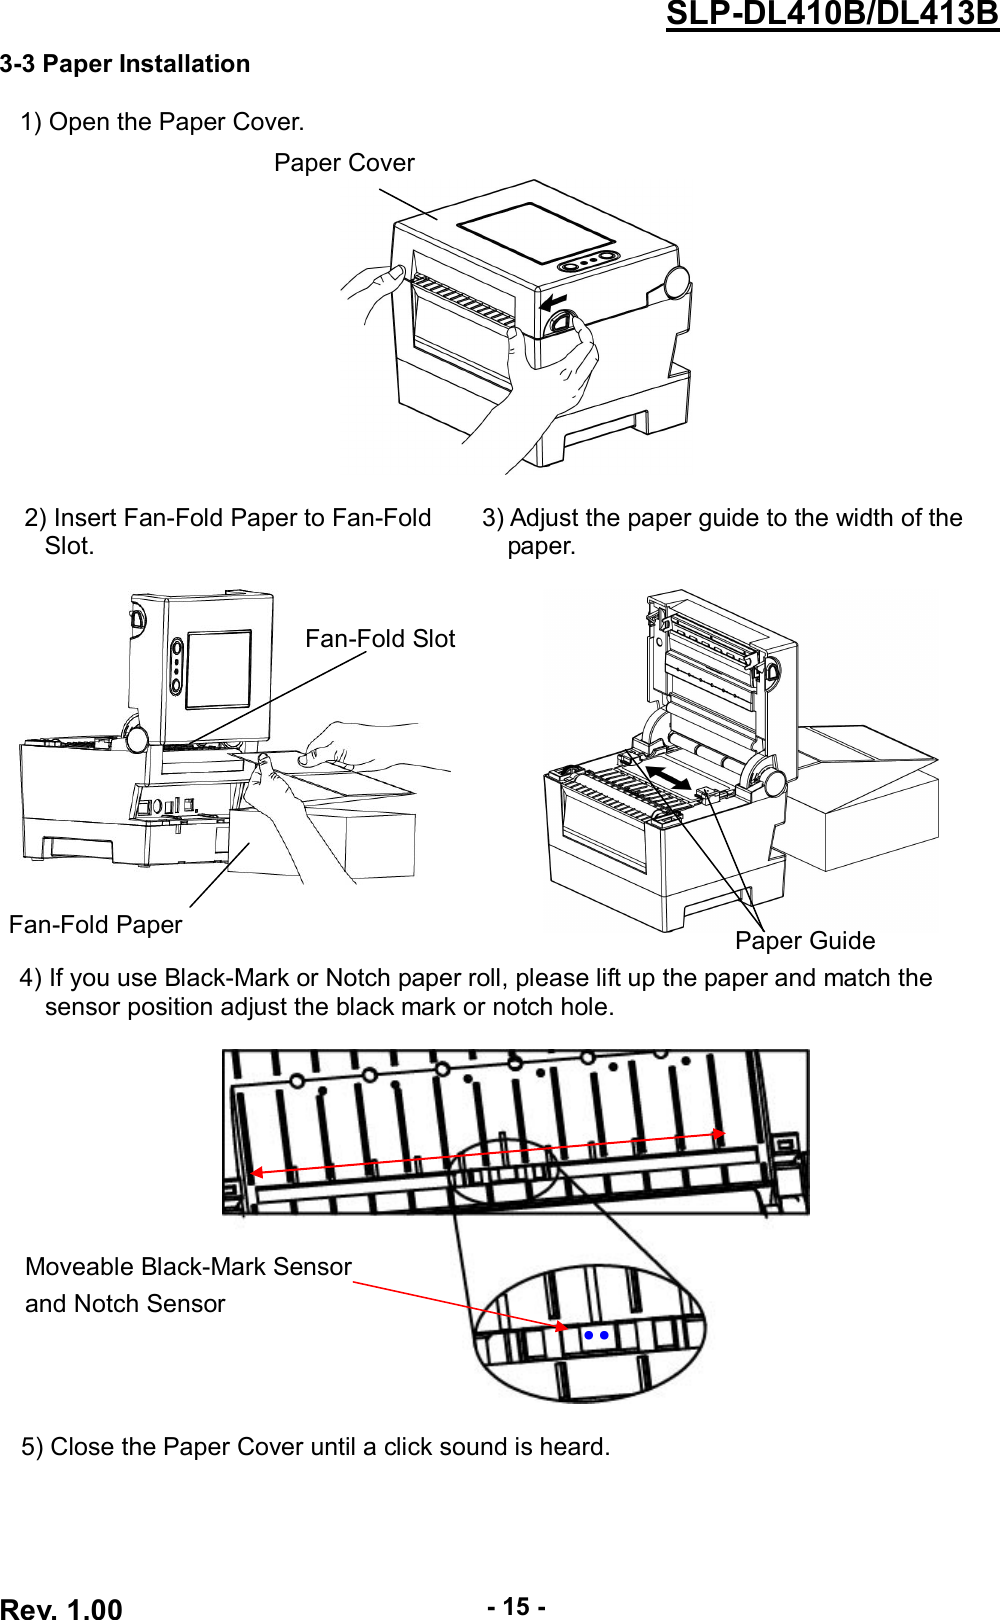  Rev. 1.00 - 15 - SLP-DL410B/DL413B 3-3 Paper Installation  1) Open the Paper Cover.   2) Insert Fan-Fold Paper to Fan-Fold        3) Adjust the paper guide to the width of the     Slot.                                 paper.      4) If you use Black-Mark or Notch paper roll, please lift up the paper and match the       sensor position adjust the black mark or notch hole.    5) Close the Paper Cover until a click sound is heard.   Moveable Black-Mark Sensor and Notch Sensor ●   Paper Cover Fan-Fold Paper Fan-Fold Slot ●   Paper Guide 